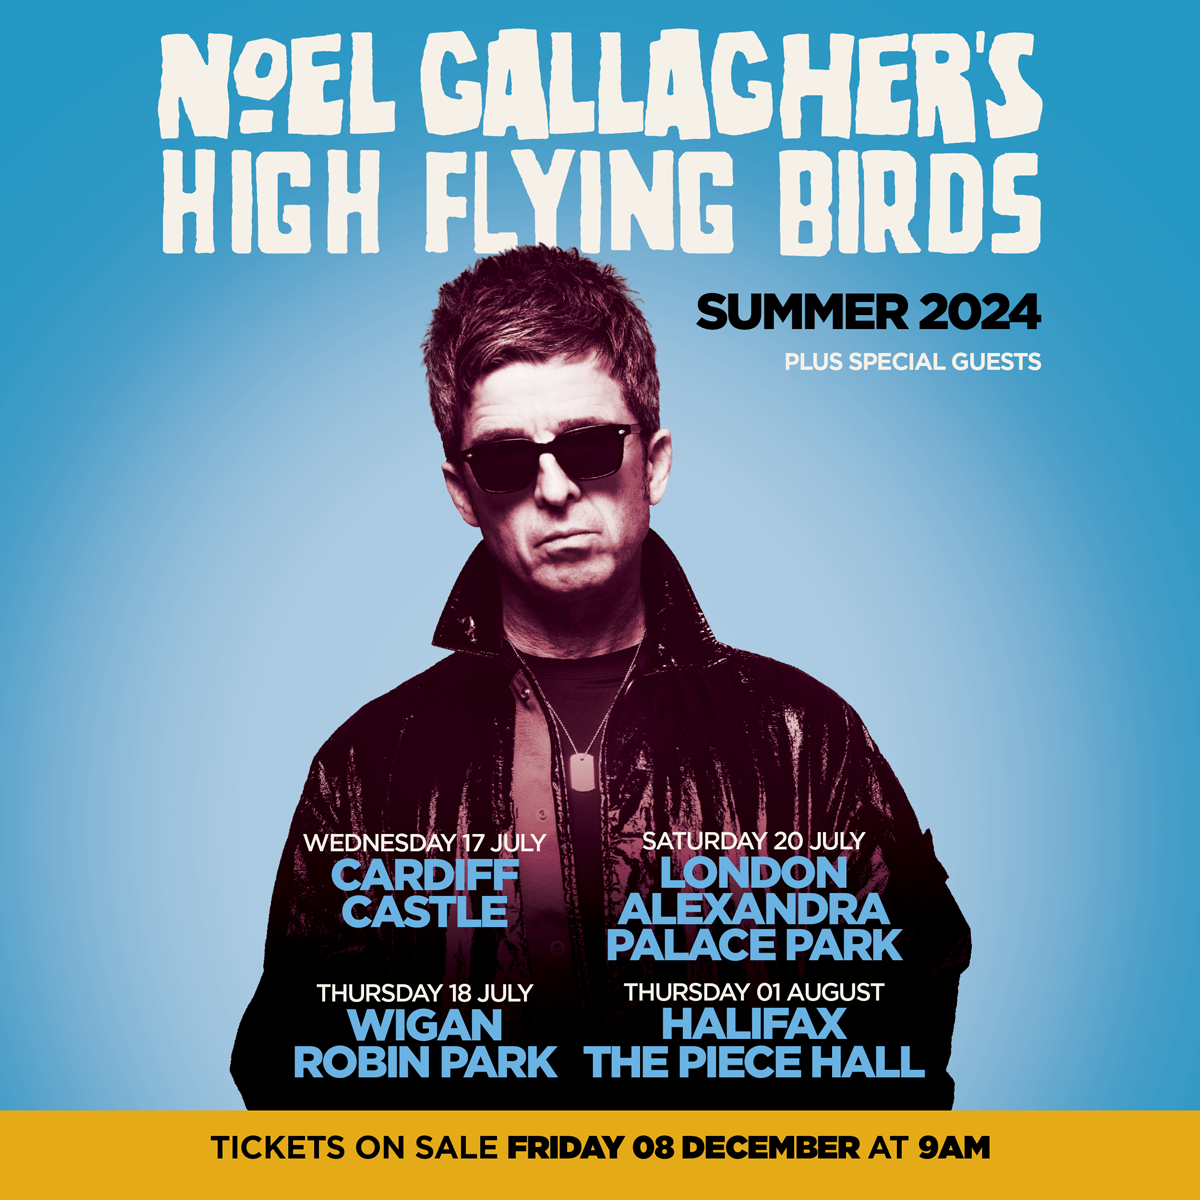 Noel Gallagher's High Flying Birds at Cardiff Castle Tickets